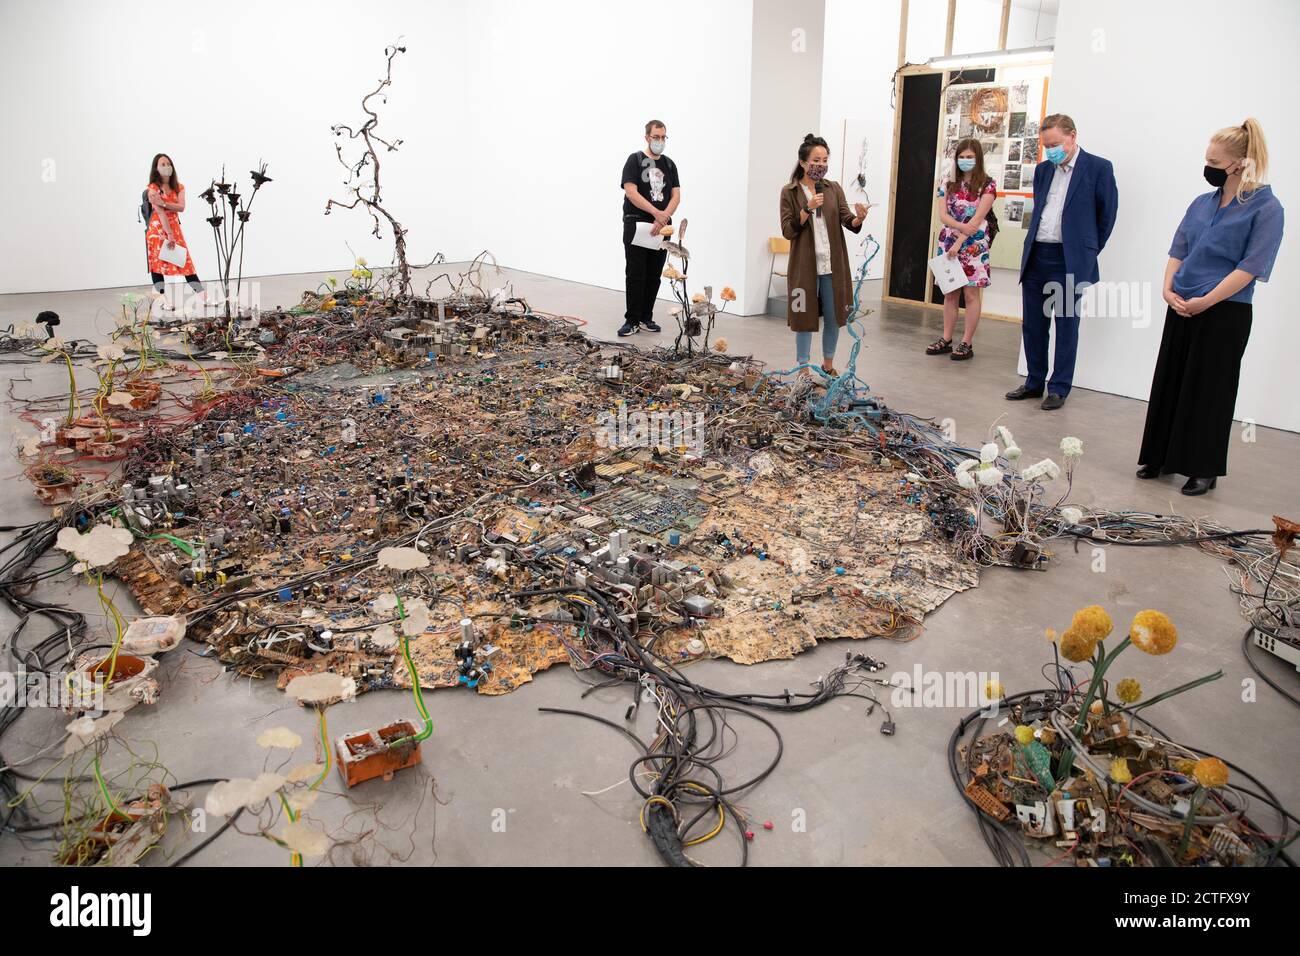 The End of Fun an exhibition by artist Kristof Kintera at the IKON gallery, Birmingham. Pictured, Postnaturalia. An artificial landscape made of discarded electrical components. The installation sprawls across the floor taking over the gallery like an invasive organism. Stock Photo